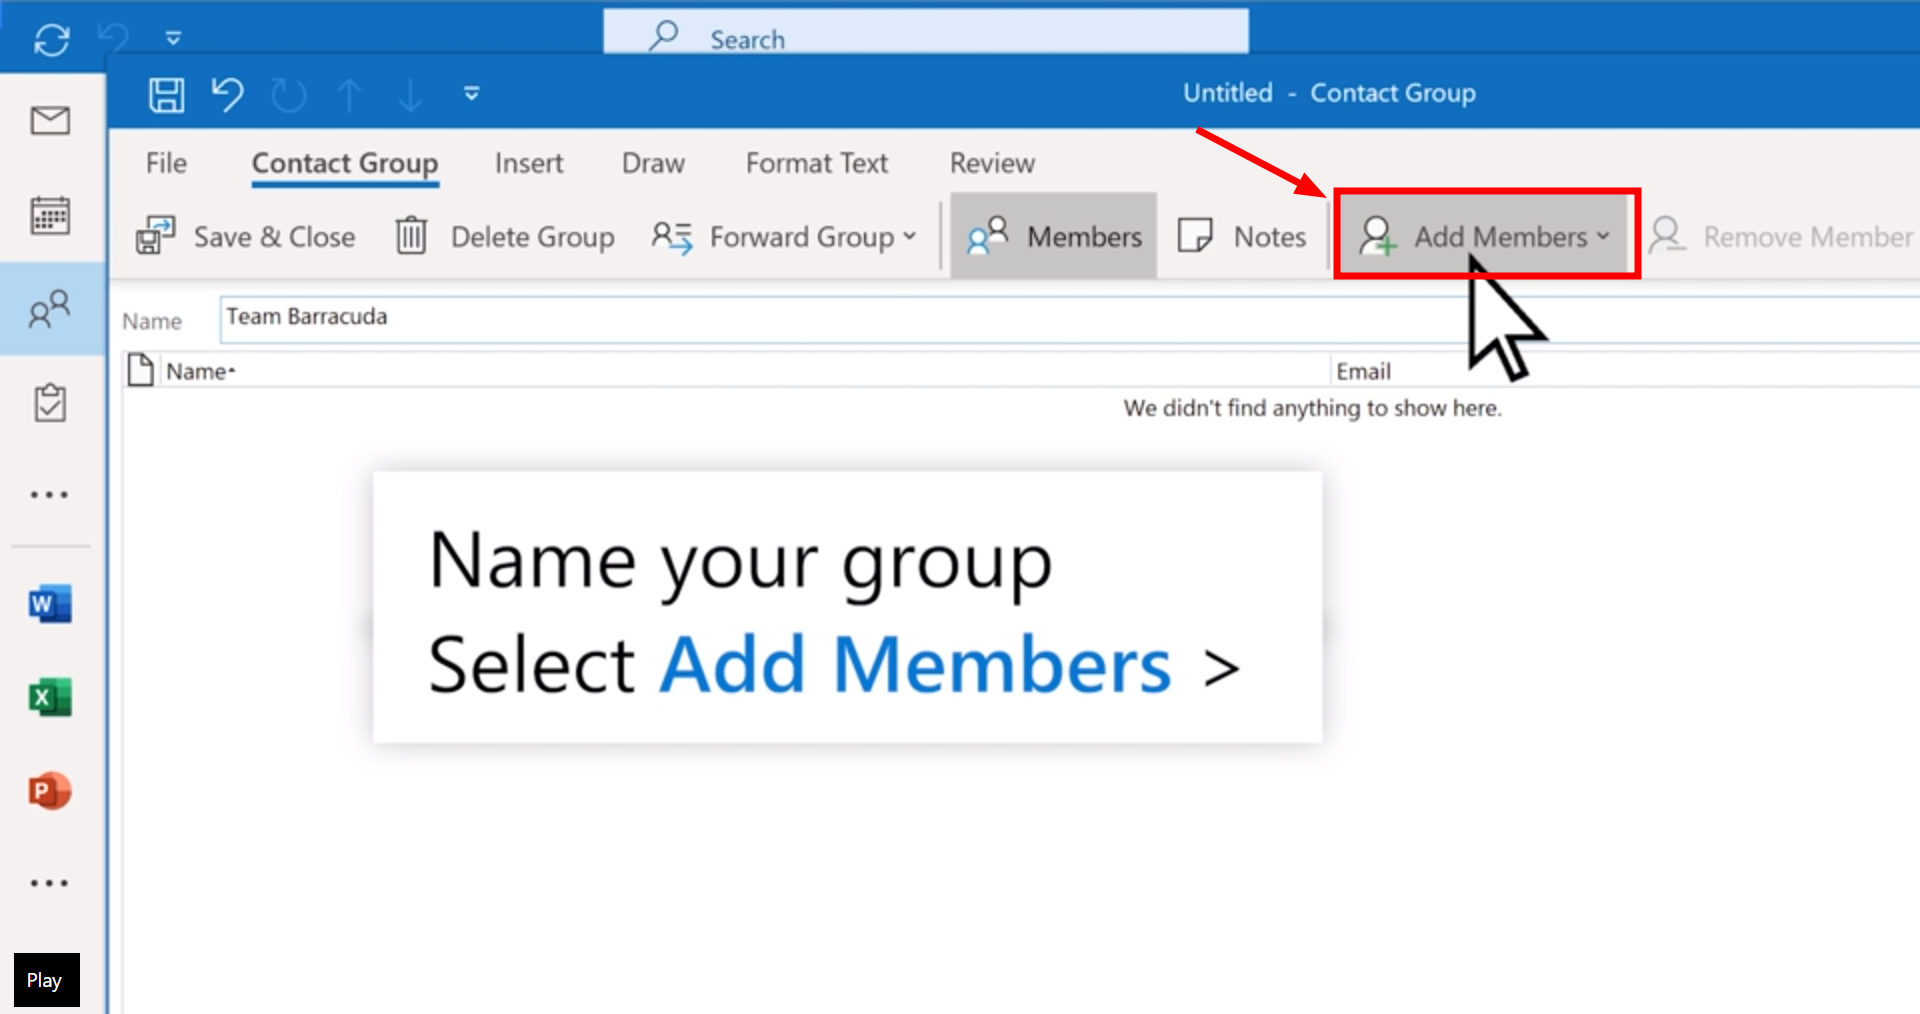 4. Then select Add Members